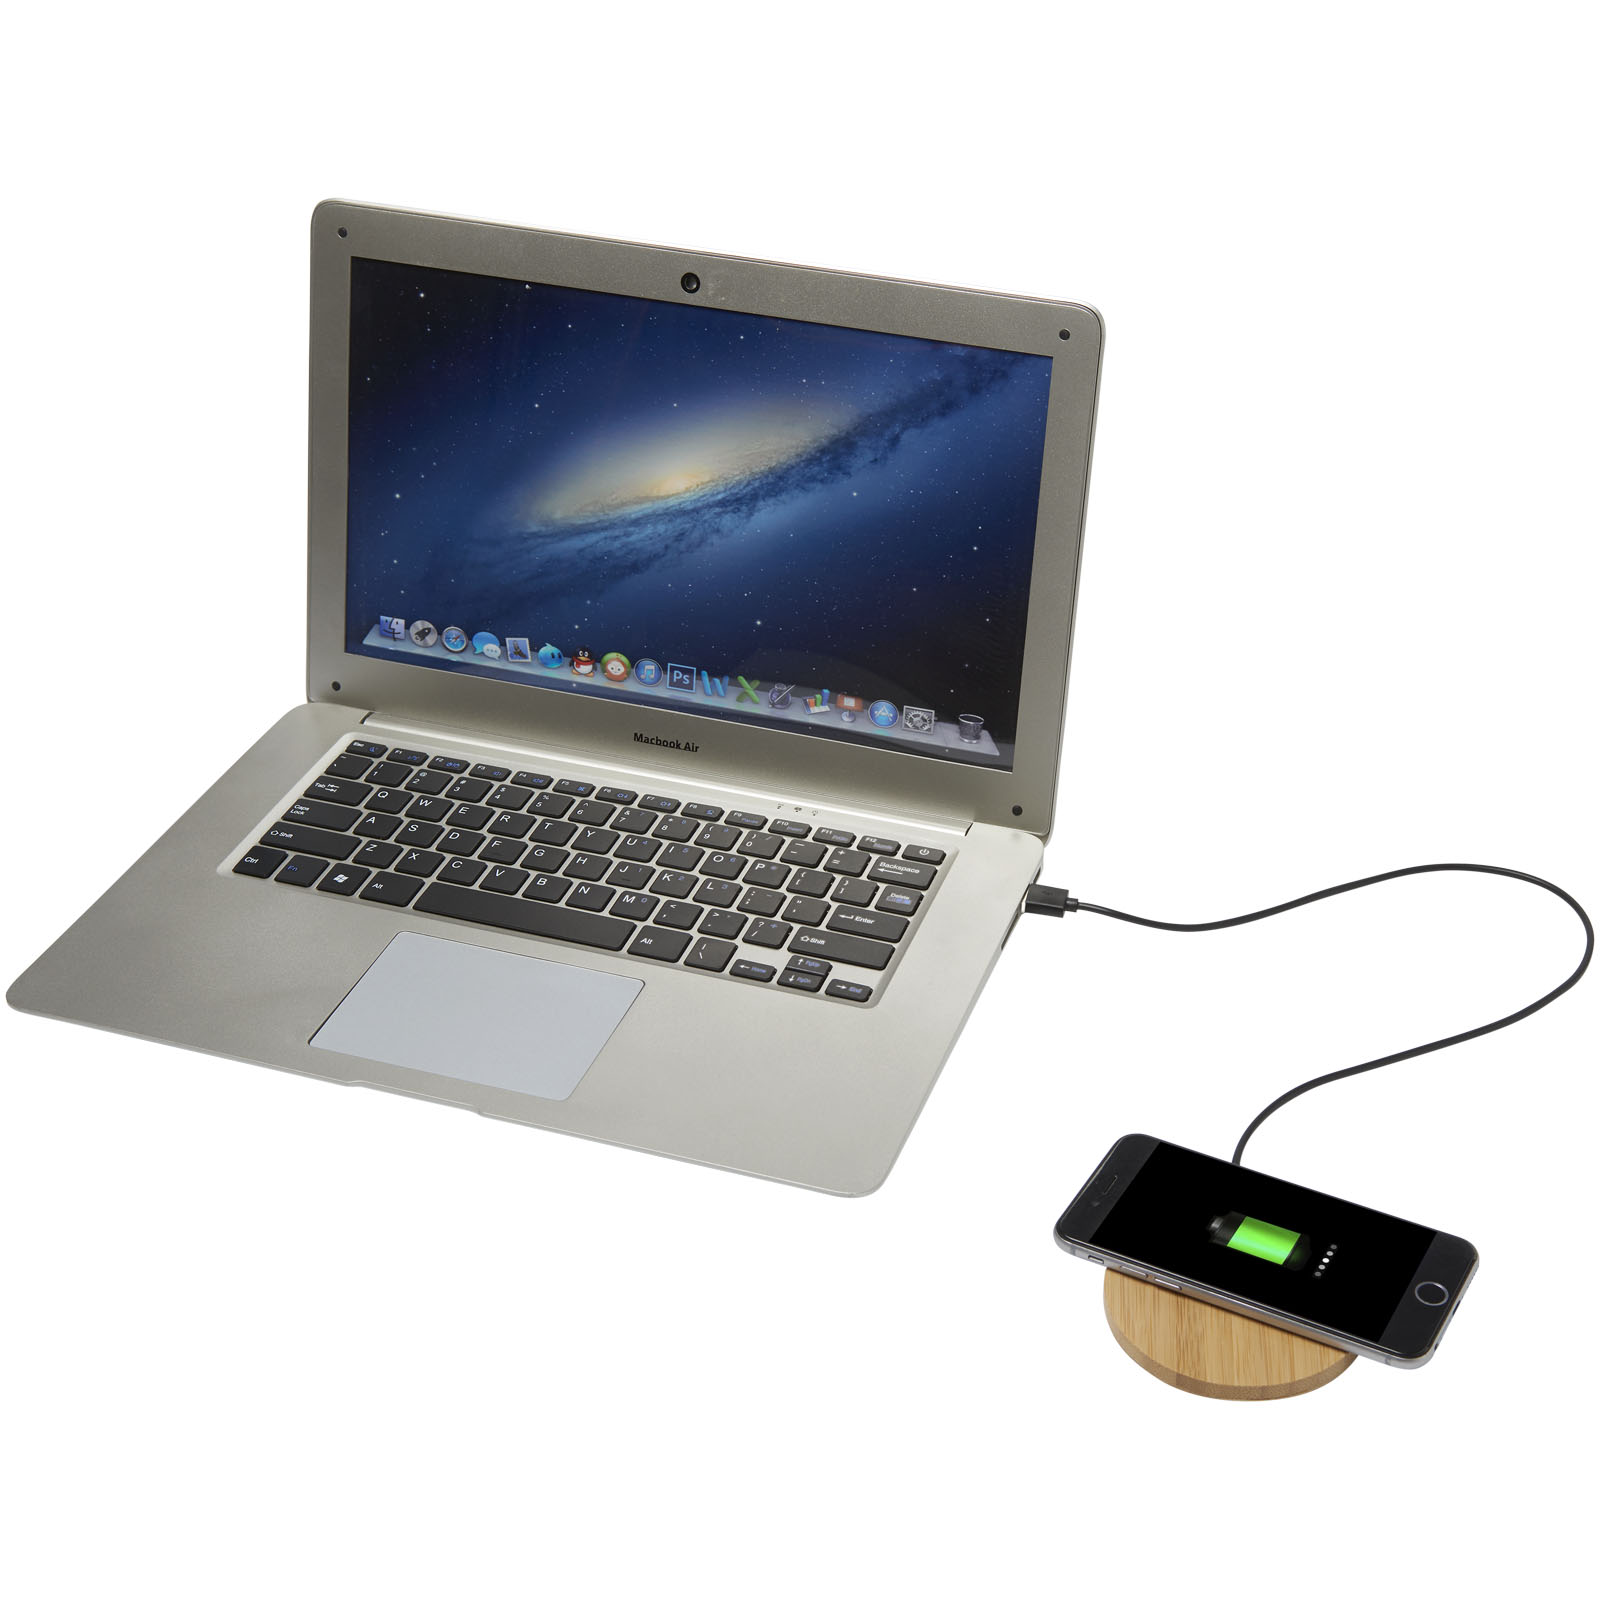 Advertising Telephone & Tablet Accessories - Essence 5W bamboo wireless charging pad - 3